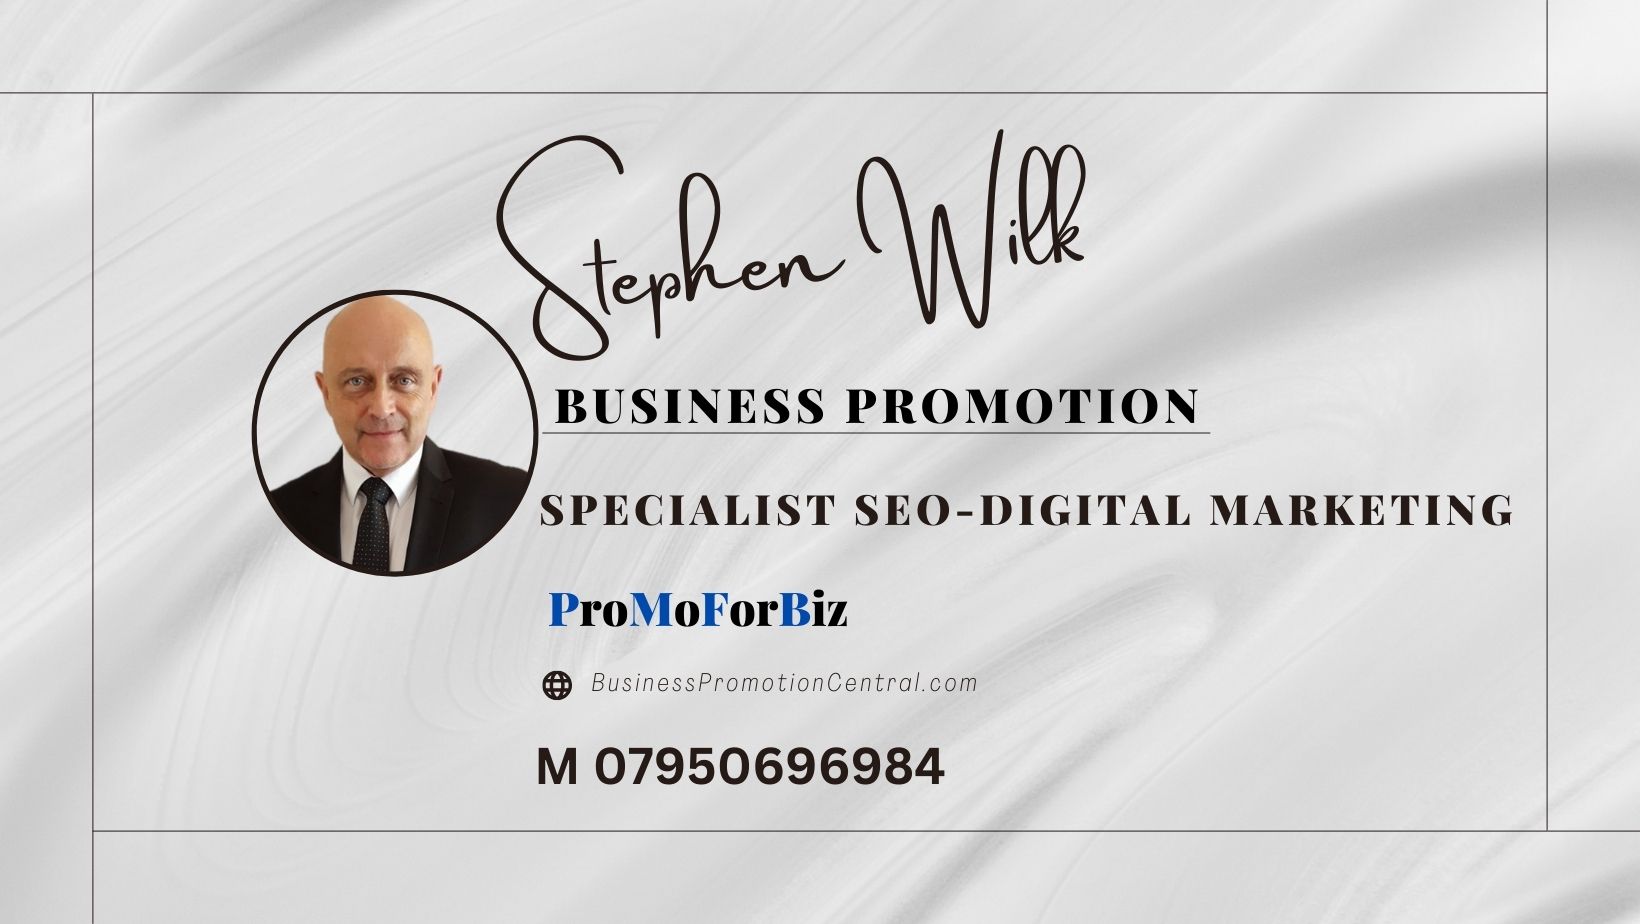 Stephen Wilk - Business Promotion Central Trusted